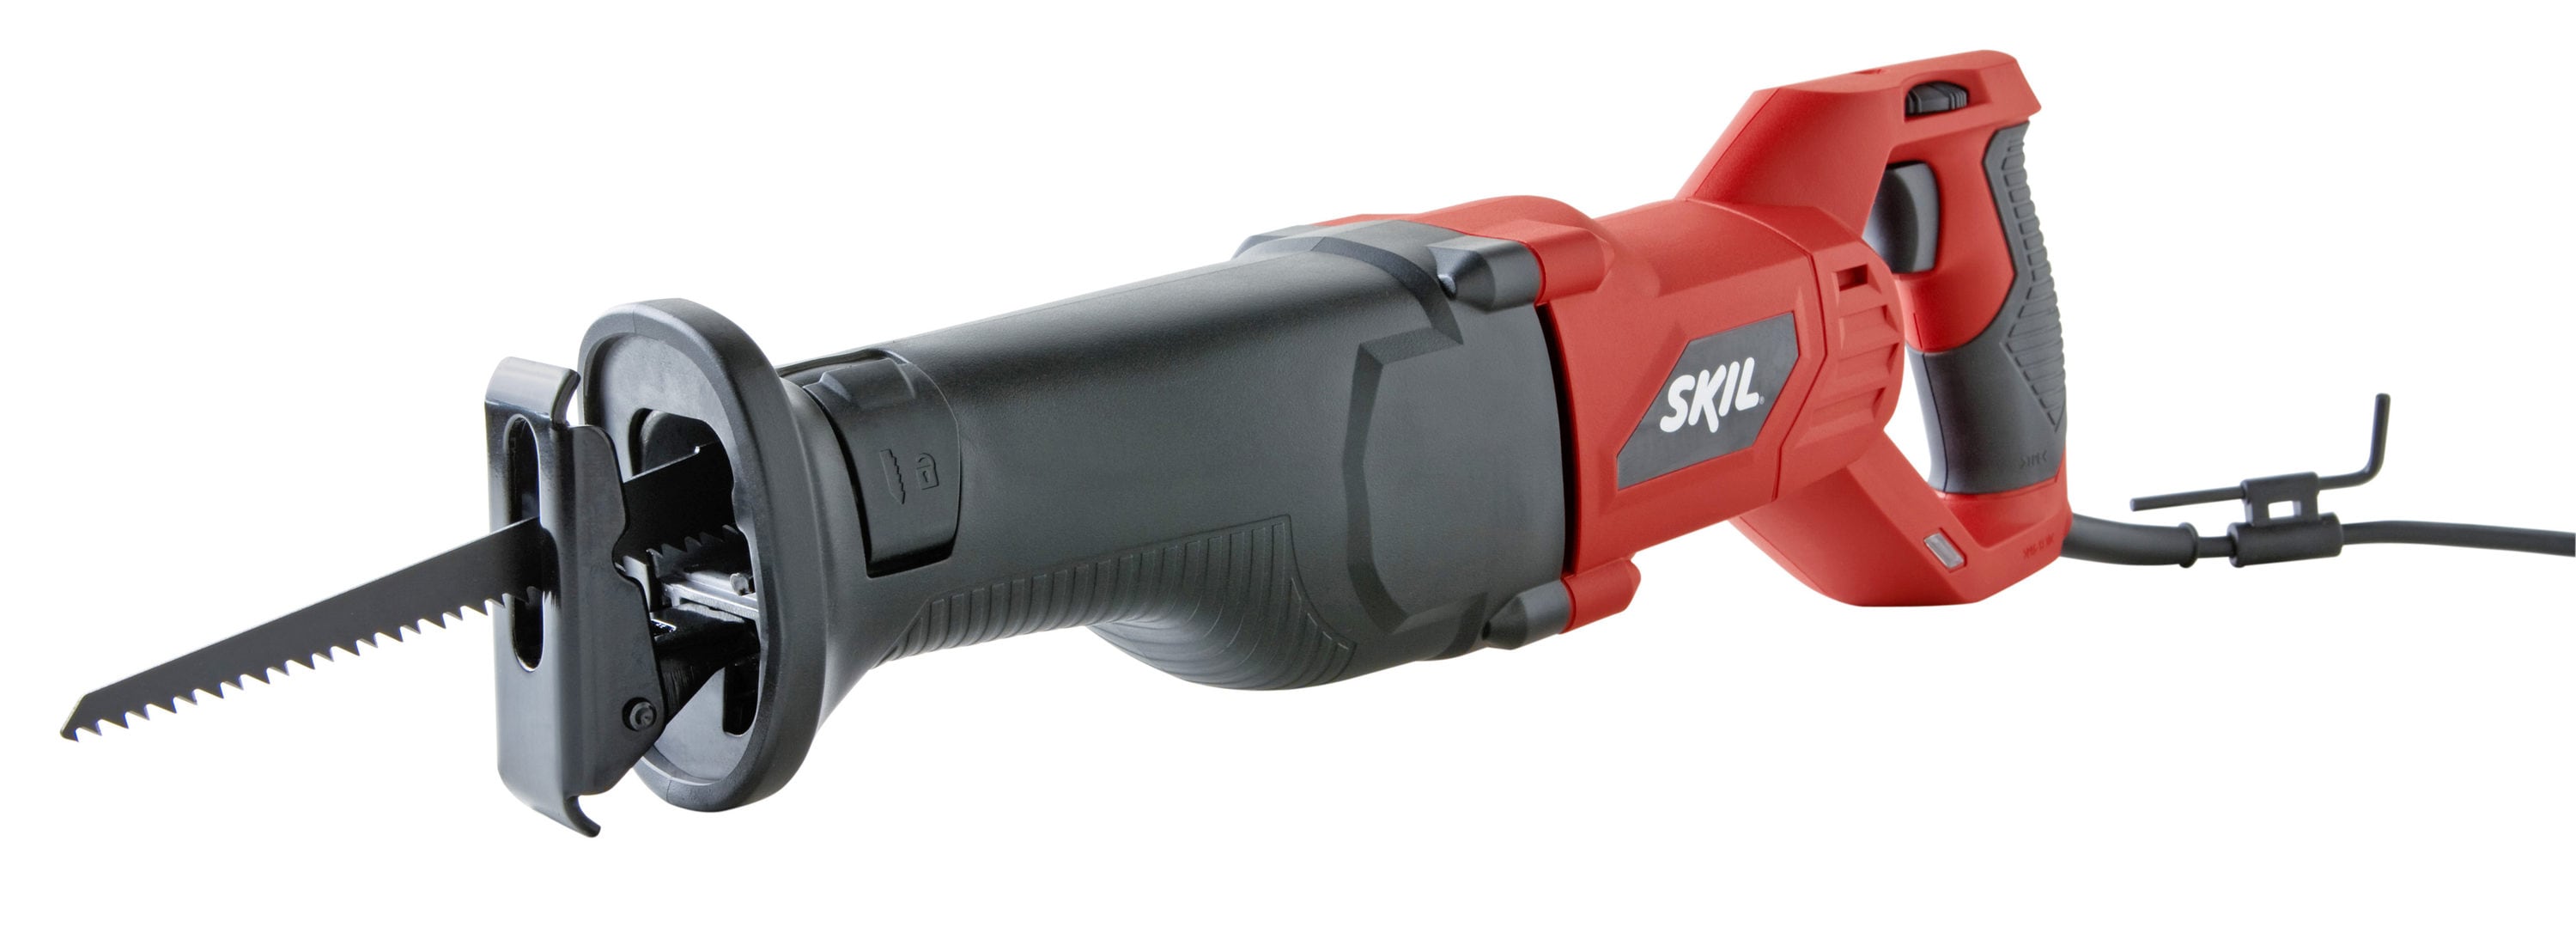 SKIL 9-Amp Variable Speed Corded Reciprocating Saw at